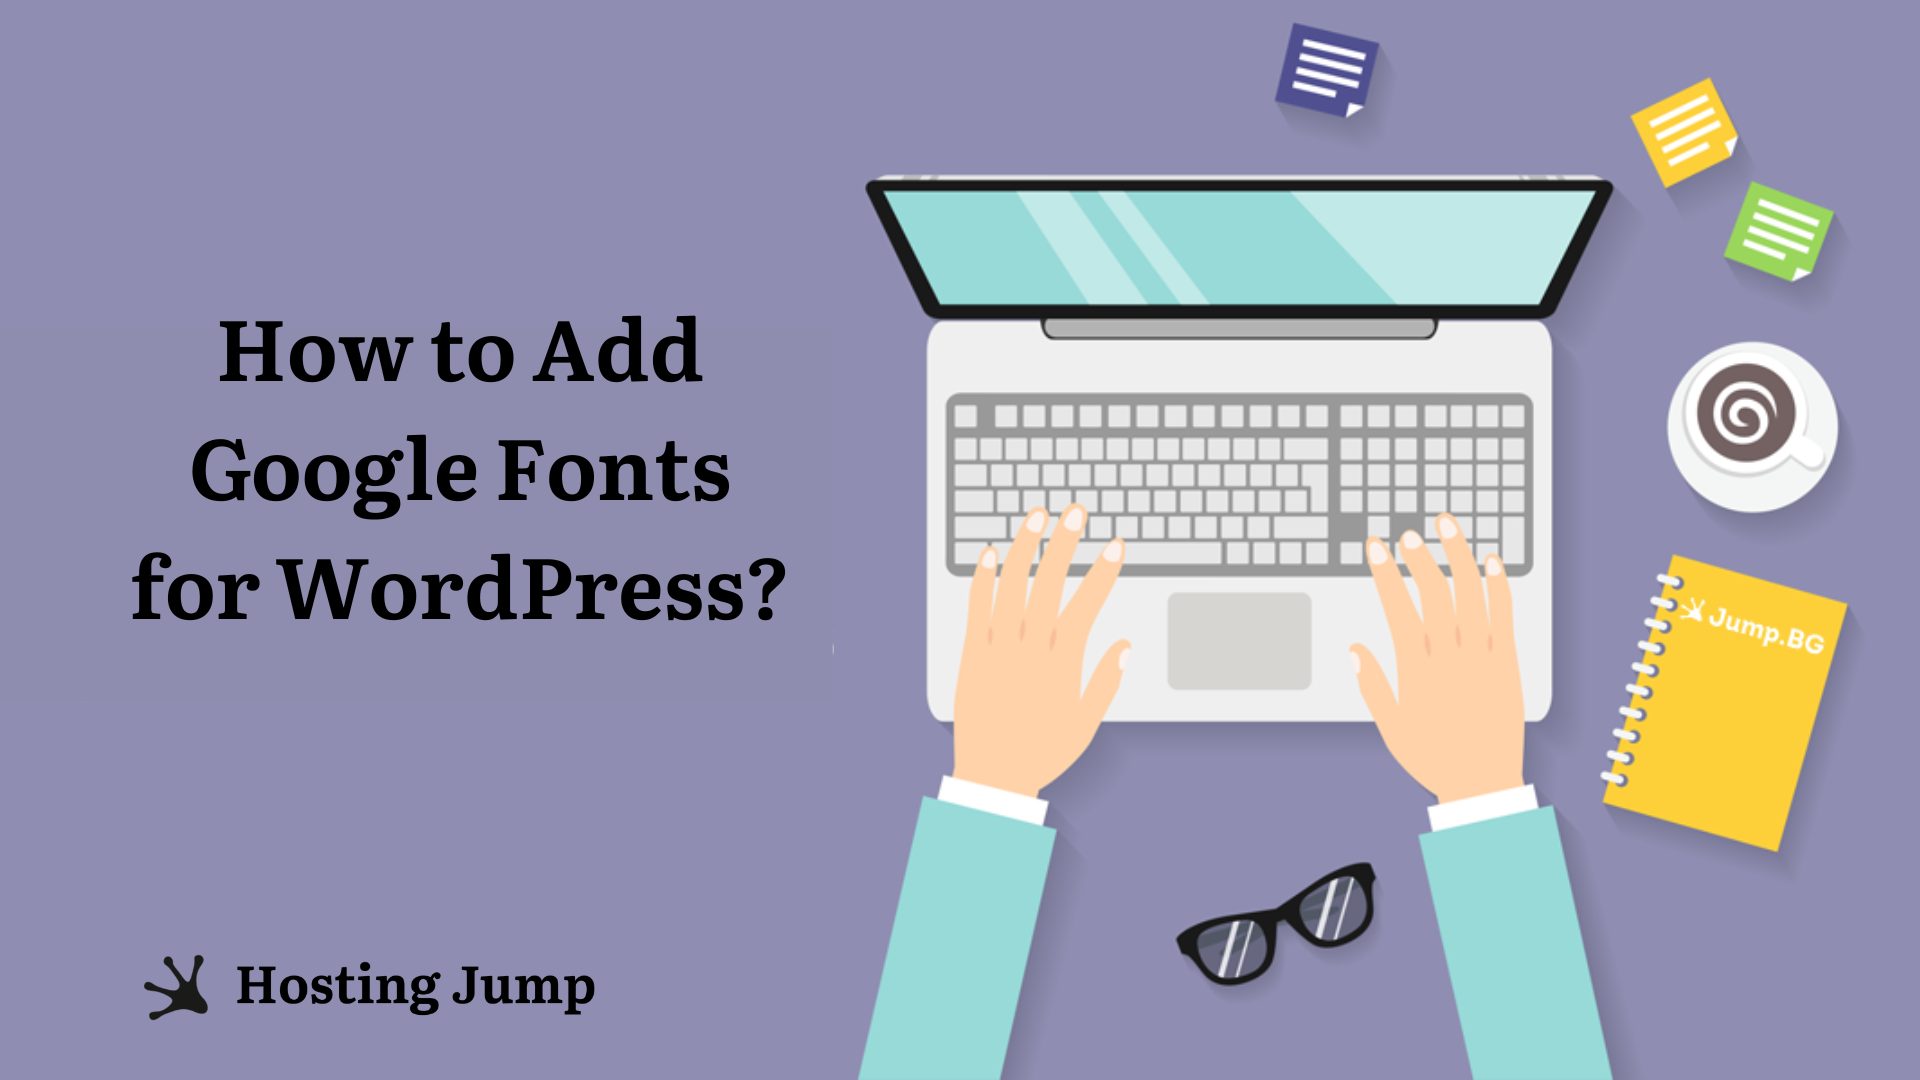 How to Add Google Fonts to WordPress or WooCommerce Websites?